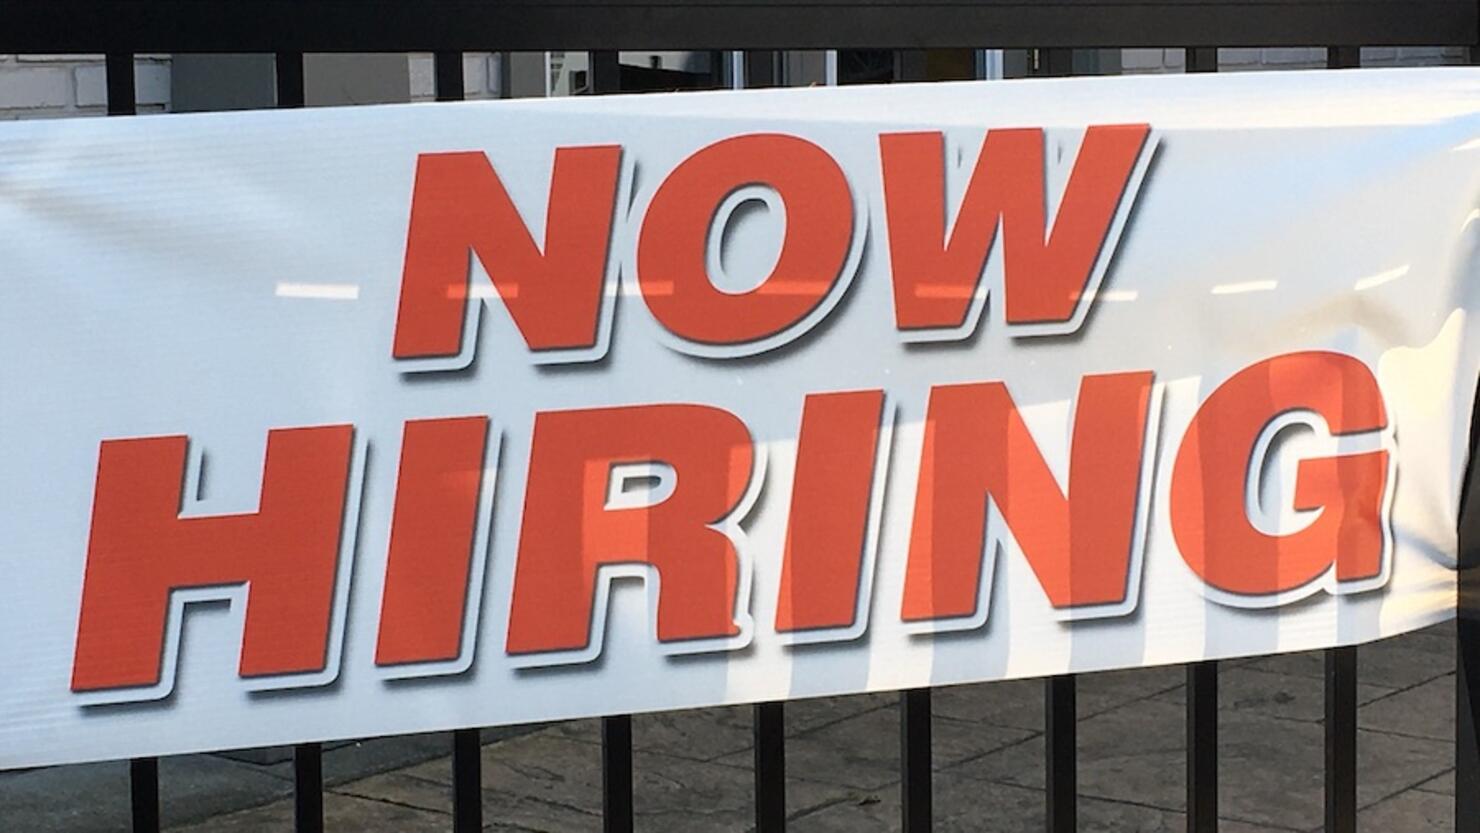 Employment sign trying to hire new workers